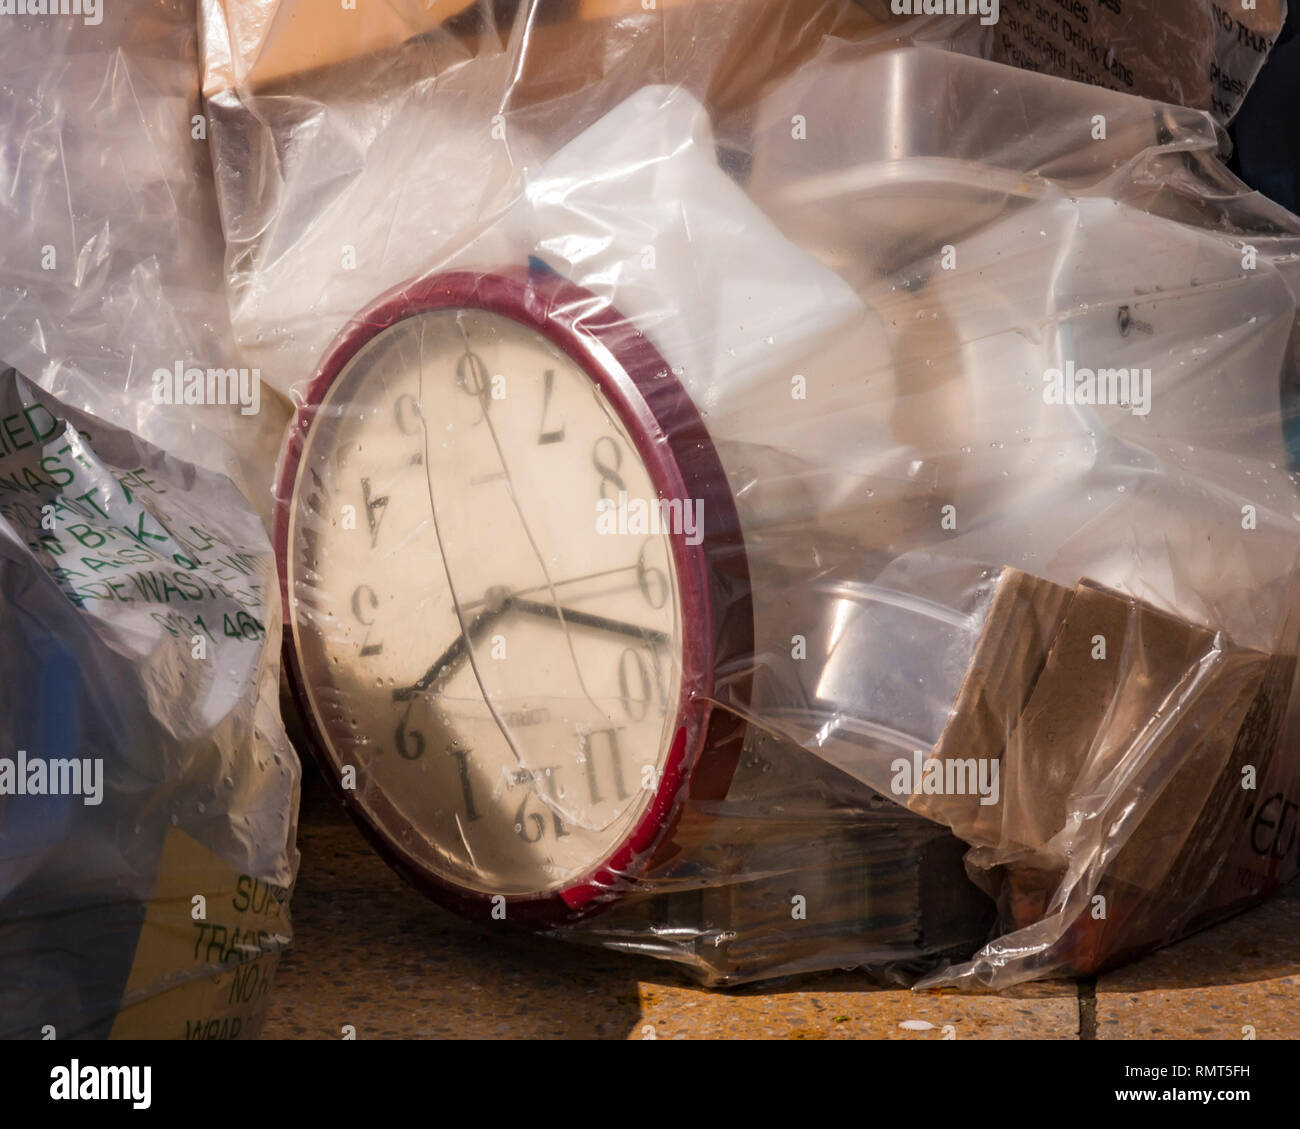 Edinburgh, Scotland - May 11 2015: A Waste of Time. Photograph showing an office clock inside plastic bags of rubbish stacked in a city street. Stock Photo